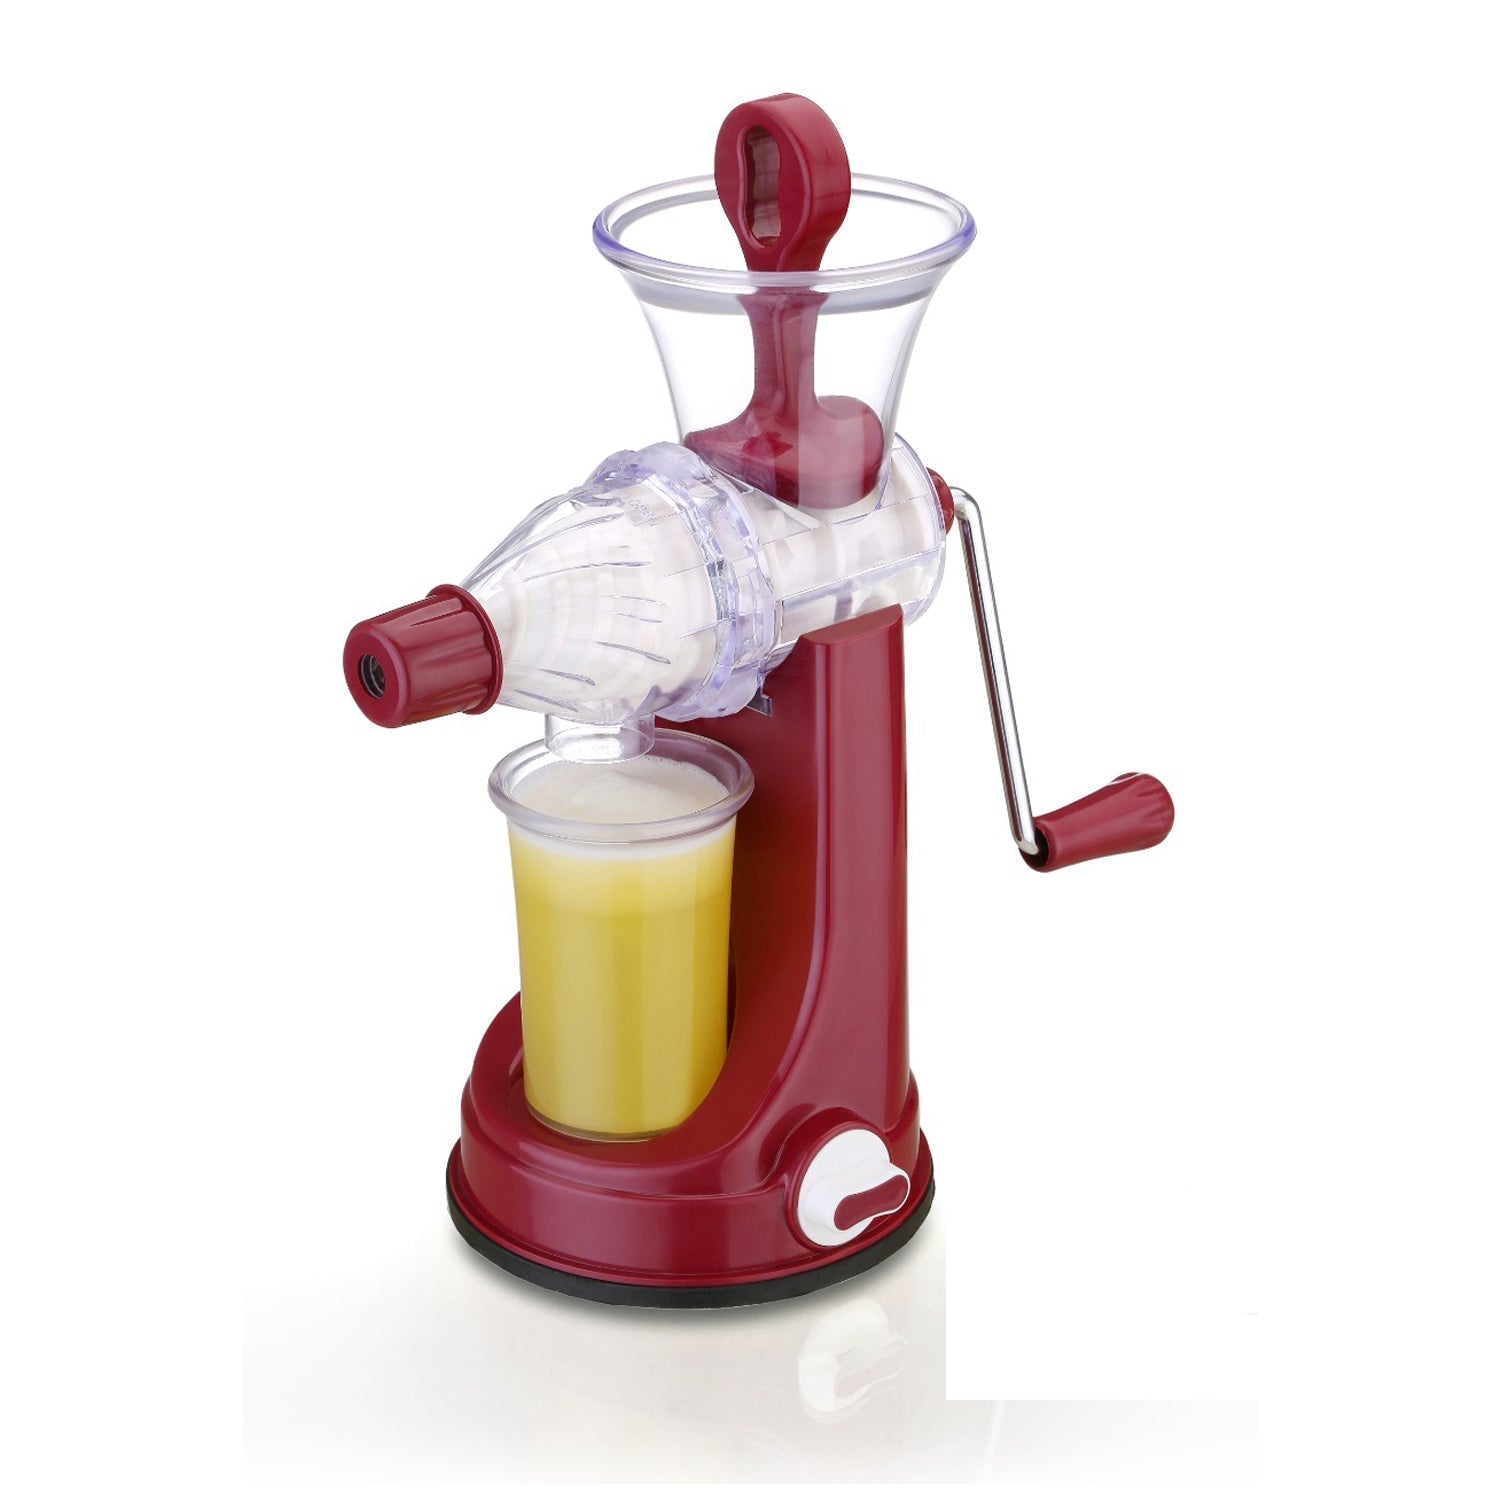 7017B ABS Juicer N Blender used widely in all kinds of household kitchen purposes for making and blending fruit juices and beverages.